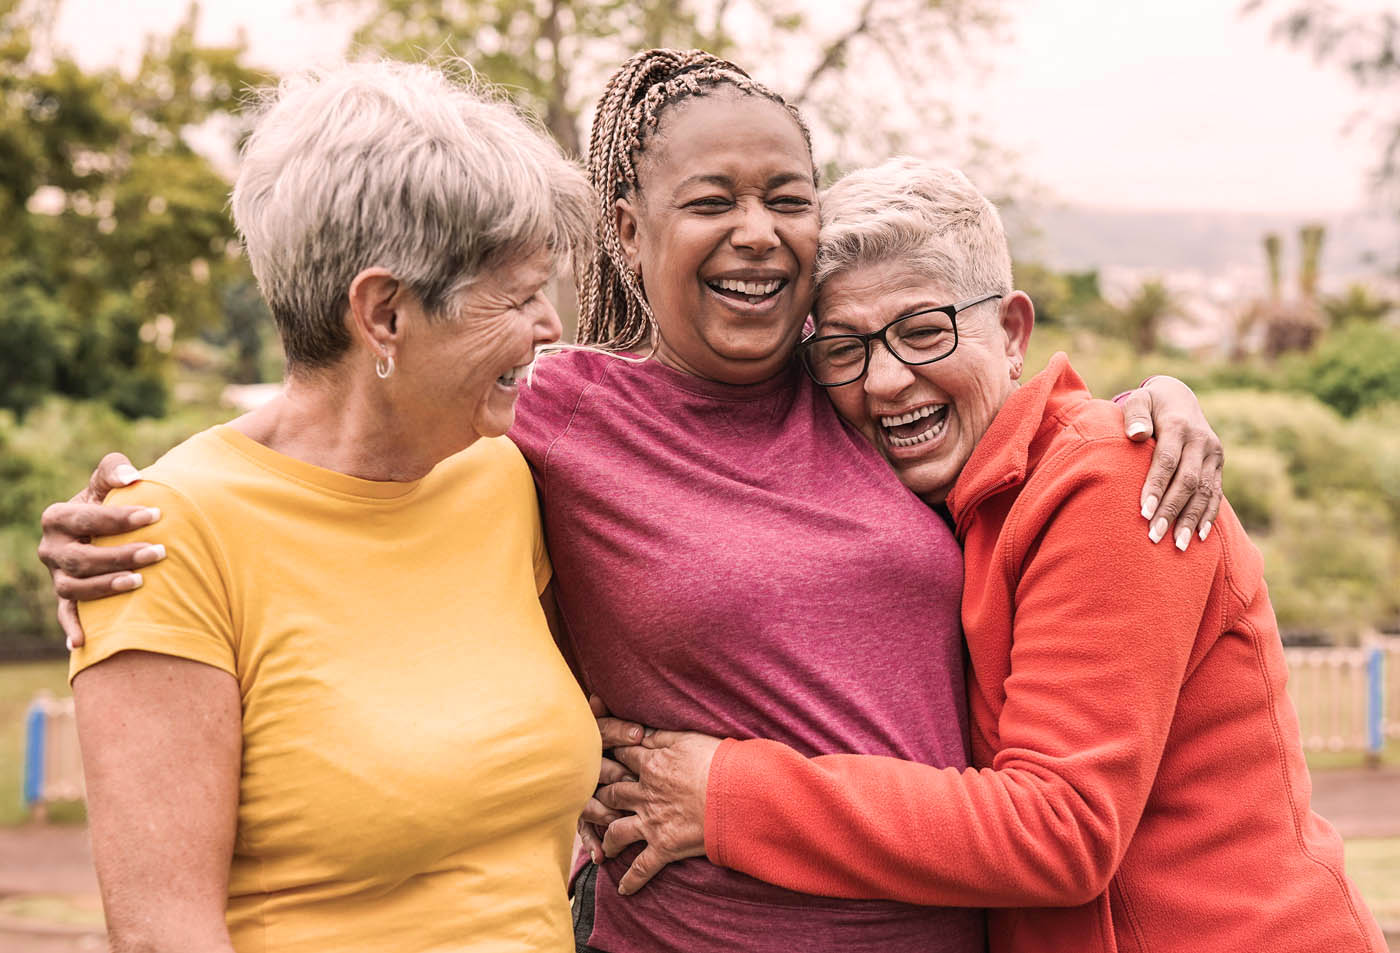 A group of elderly women laughing and hugging each other - discover Arvada multiple sclerosis pain treatment today.